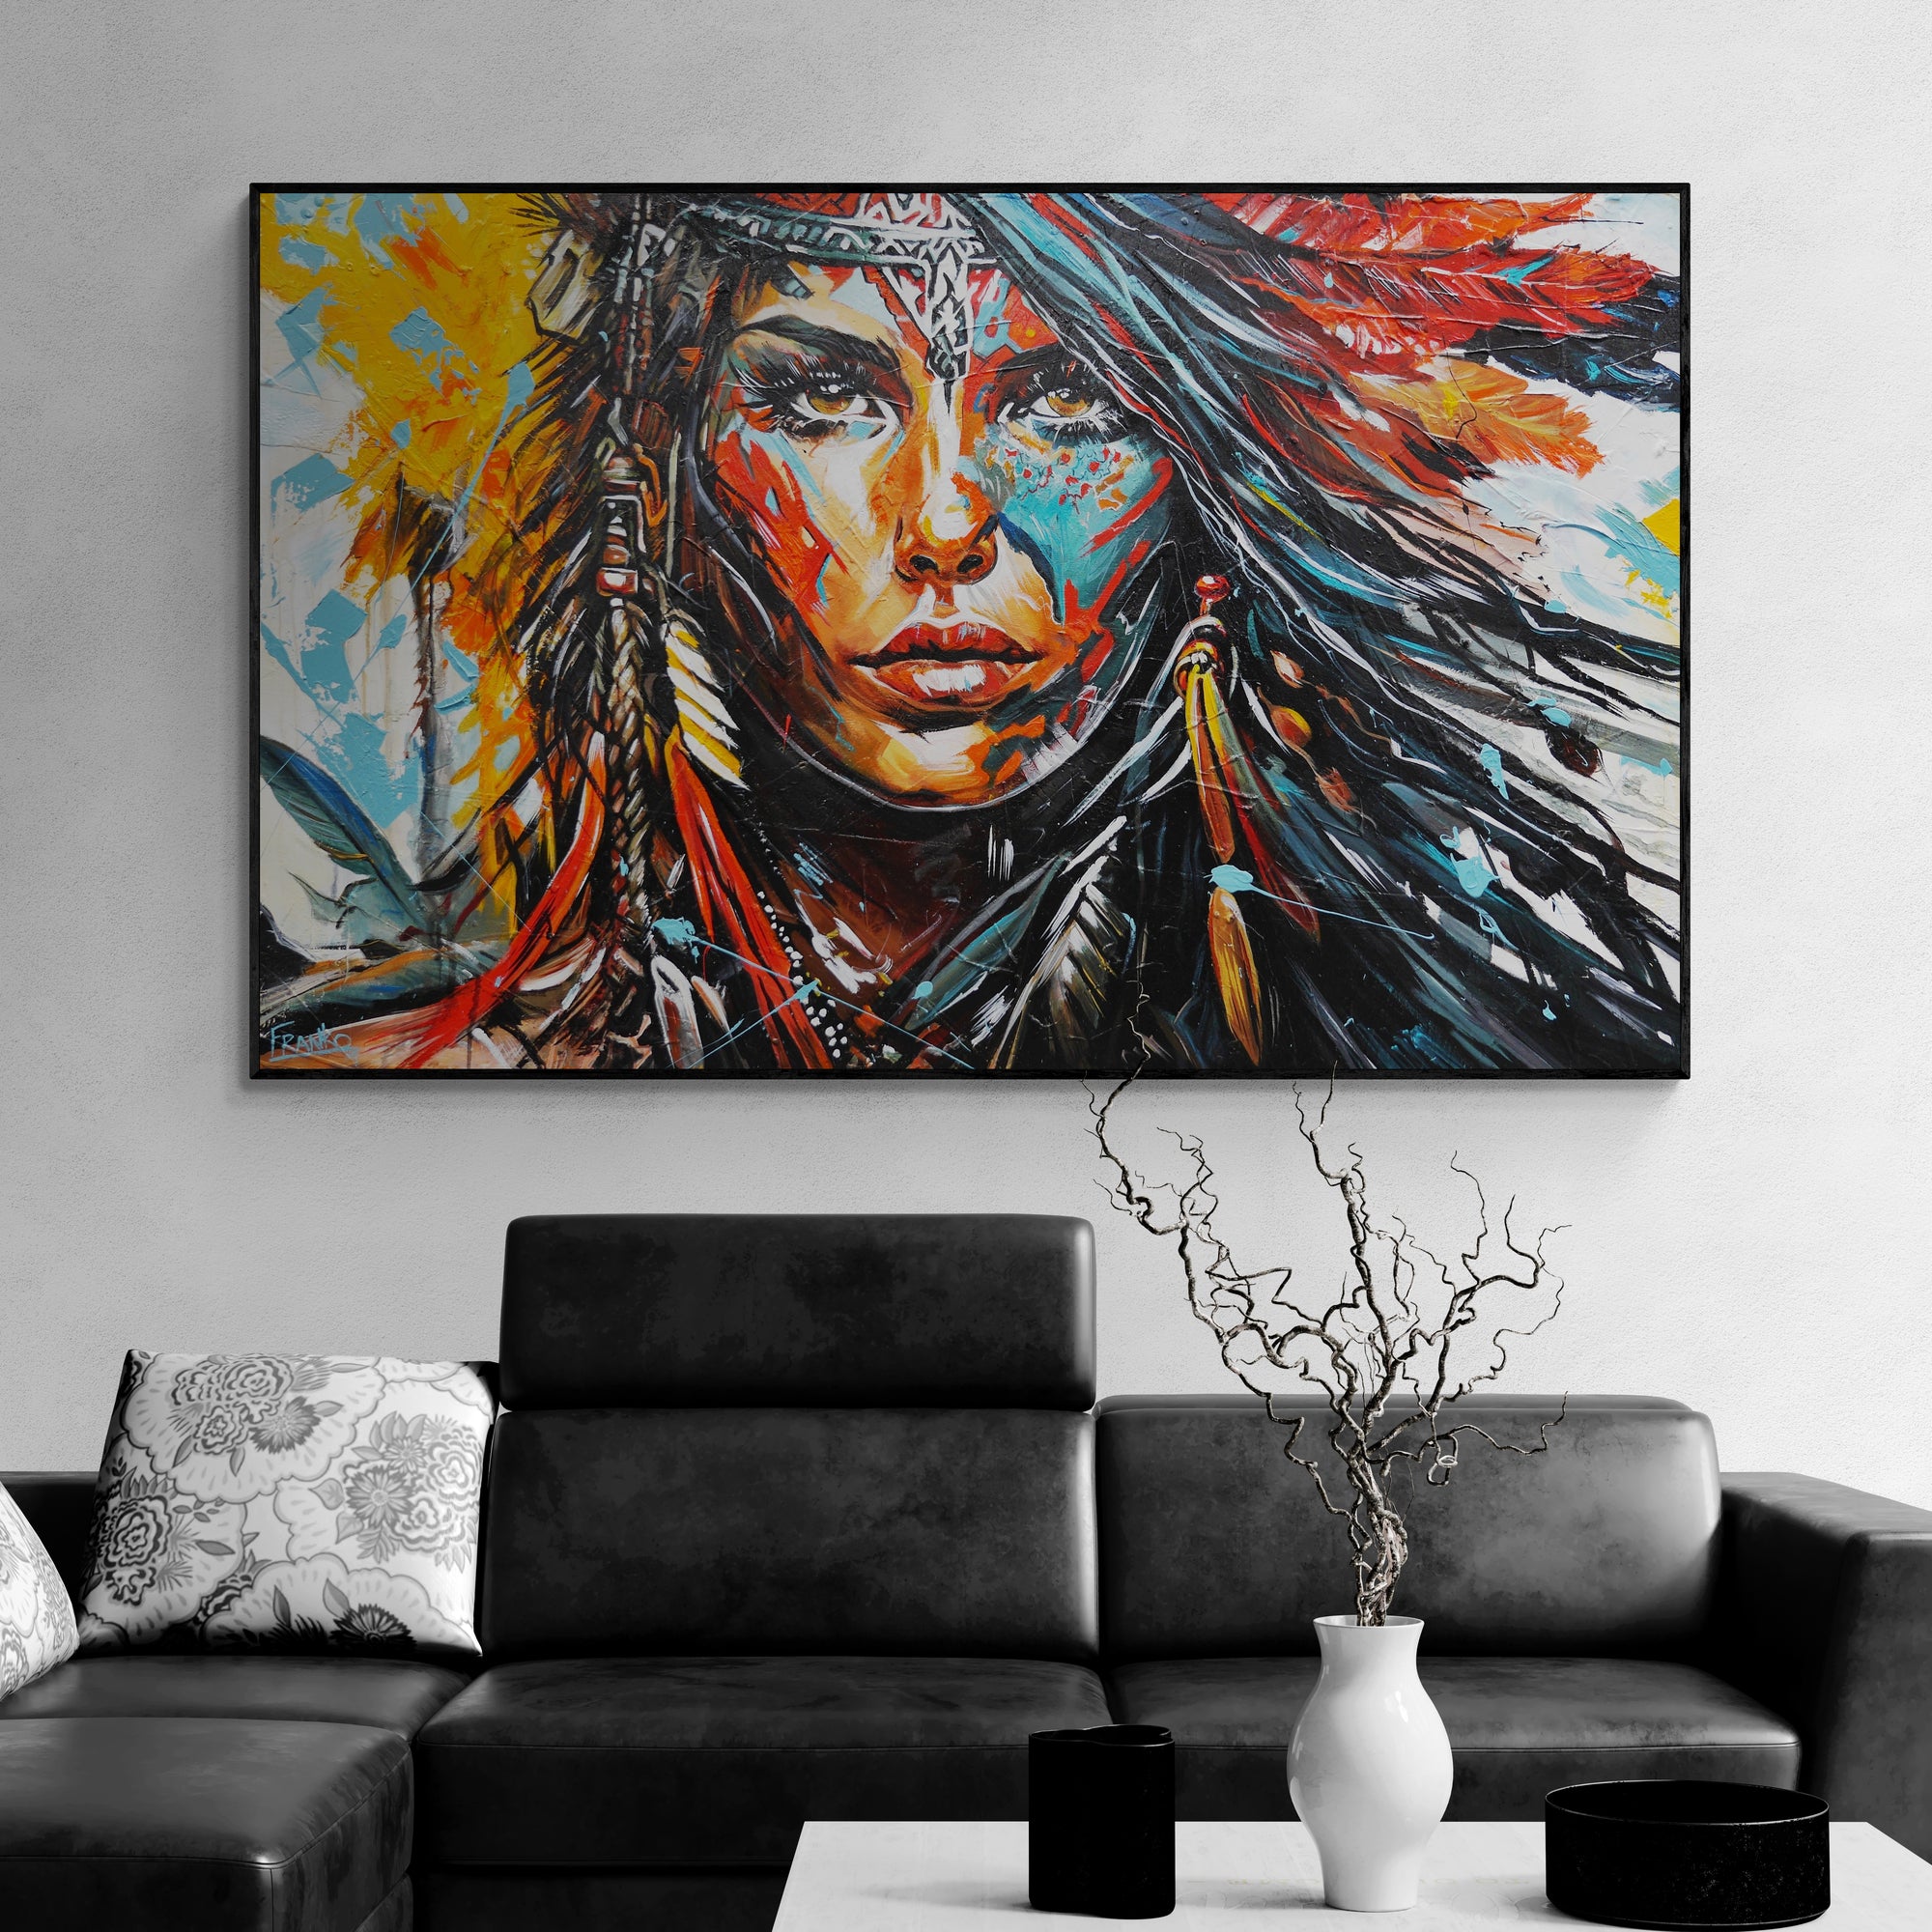 Warrior Princess 160cm x 100cm Framed Indian Abstract Realism Textured Painting (SOLD)